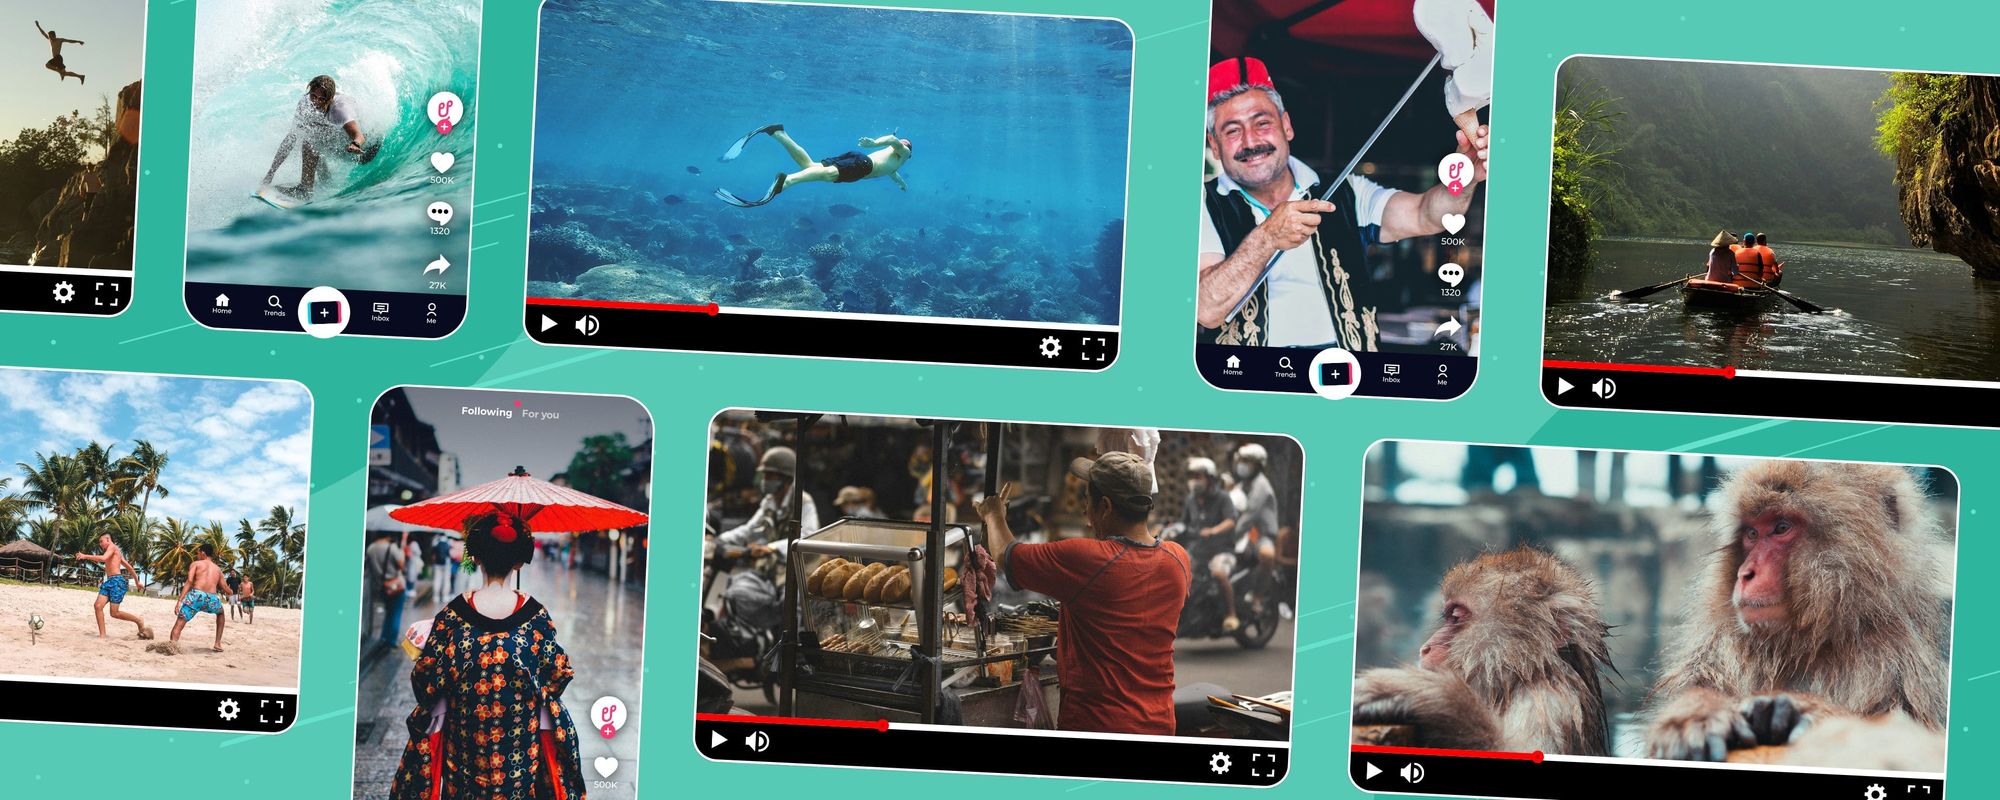 Examples of different travel content ideas featuring a variety of activities and experiences.